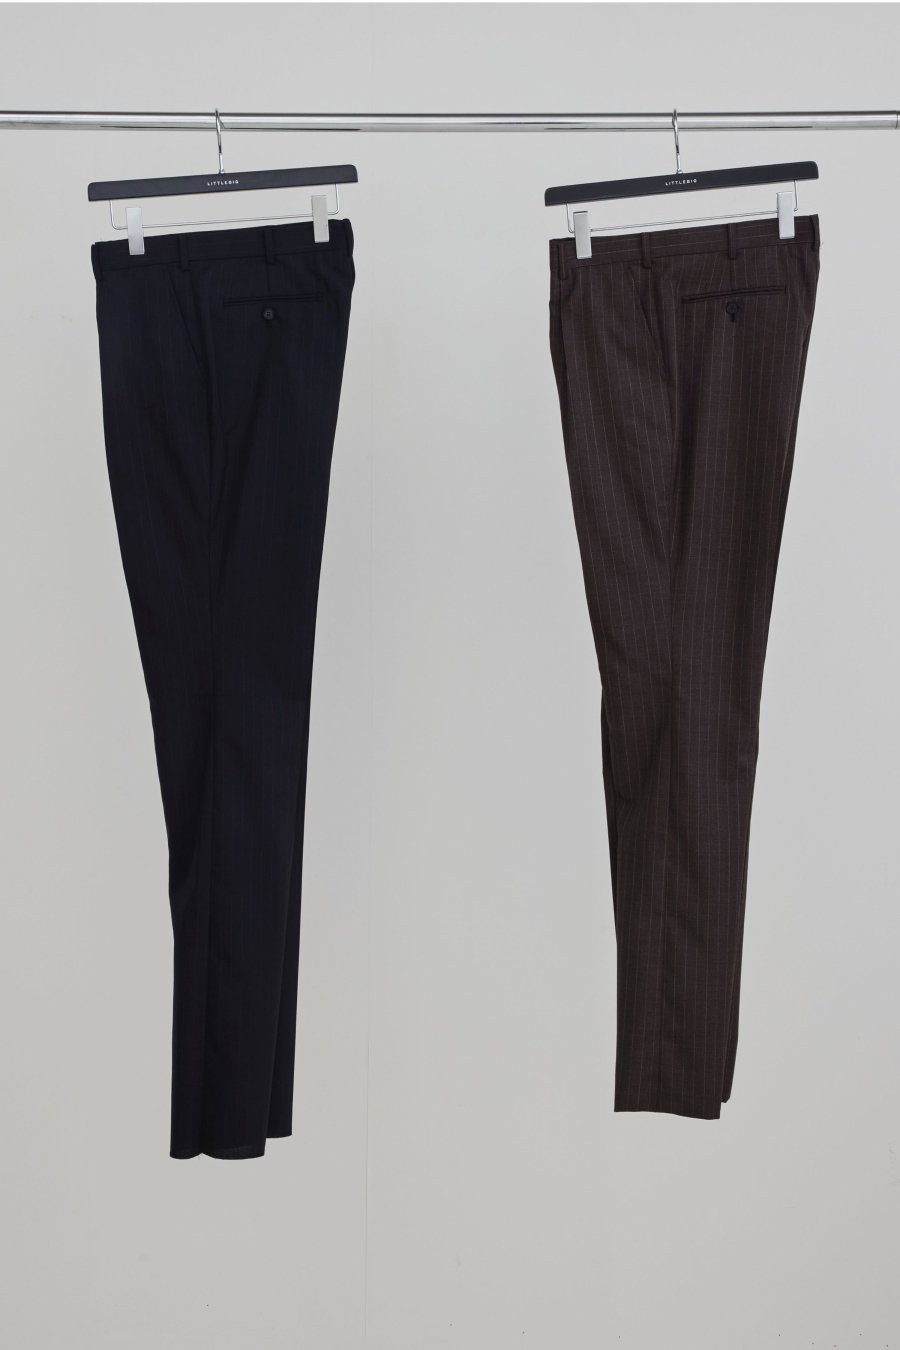 LITTLEBIG  Chalk Stripe Flare Trousers(Black or Brown)<img class='new_mark_img2' src='https://img.shop-pro.jp/img/new/icons15.gif' style='border:none;display:inline;margin:0px;padding:0px;width:auto;' />